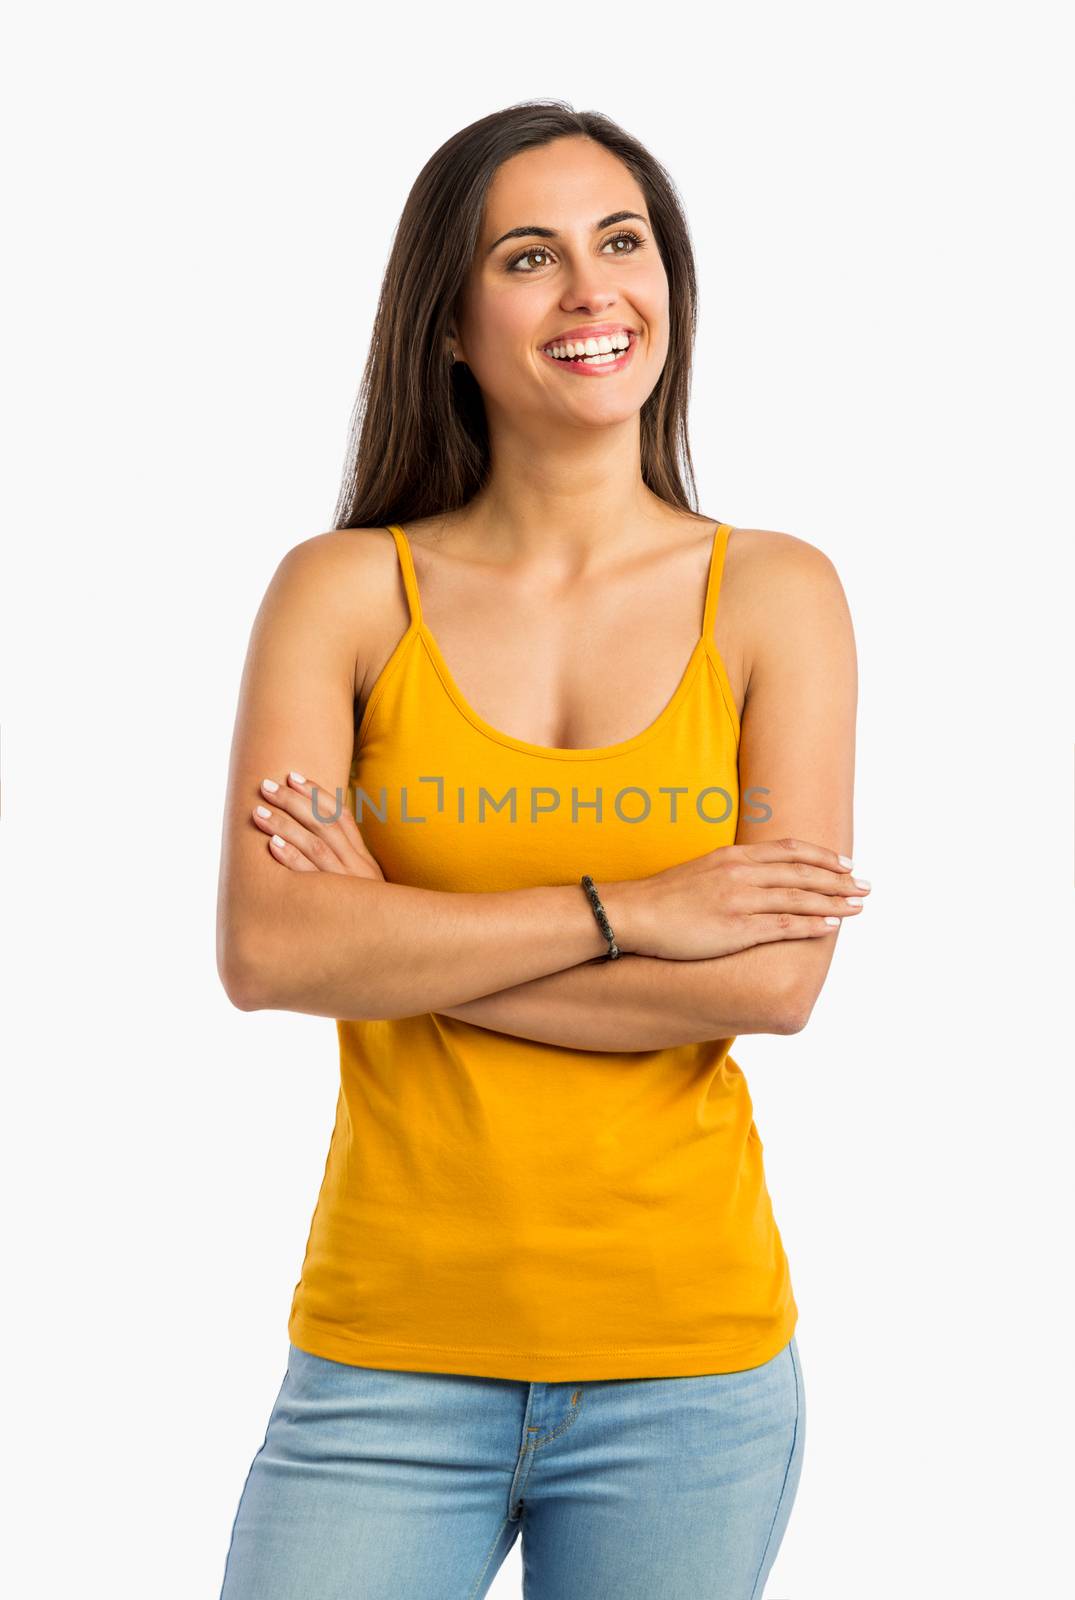 Portrait of a beautiful young woman smiling 